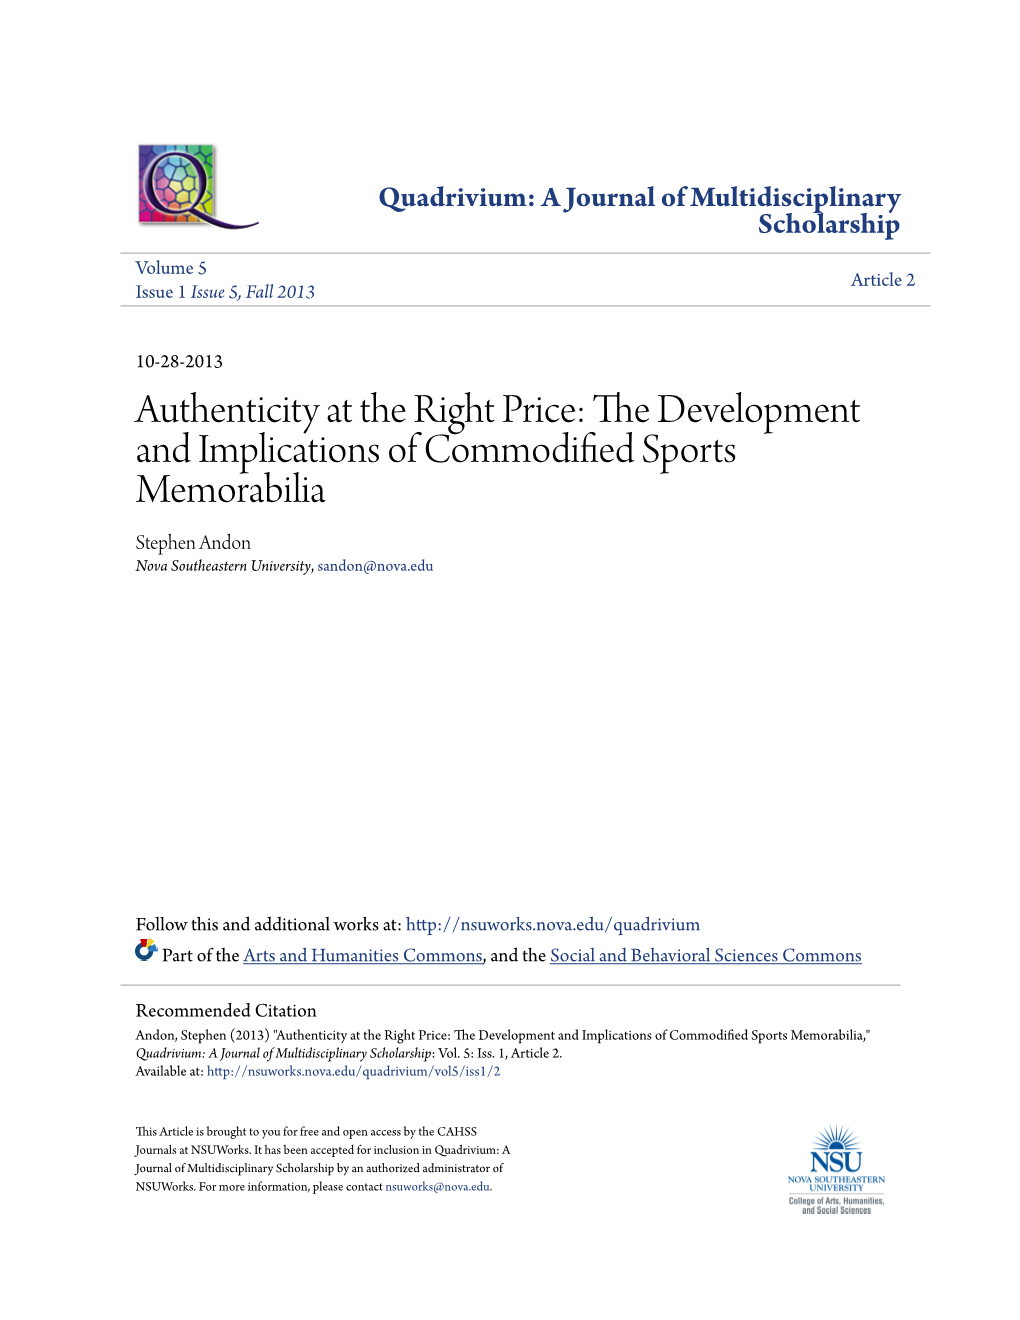 AUTHENTICITY at the RIGHT PRICE: the DEVELOPMENT and IMPLICATIONS of COMMODIFIED SPORTS MEMORABILIA Stephen Andon